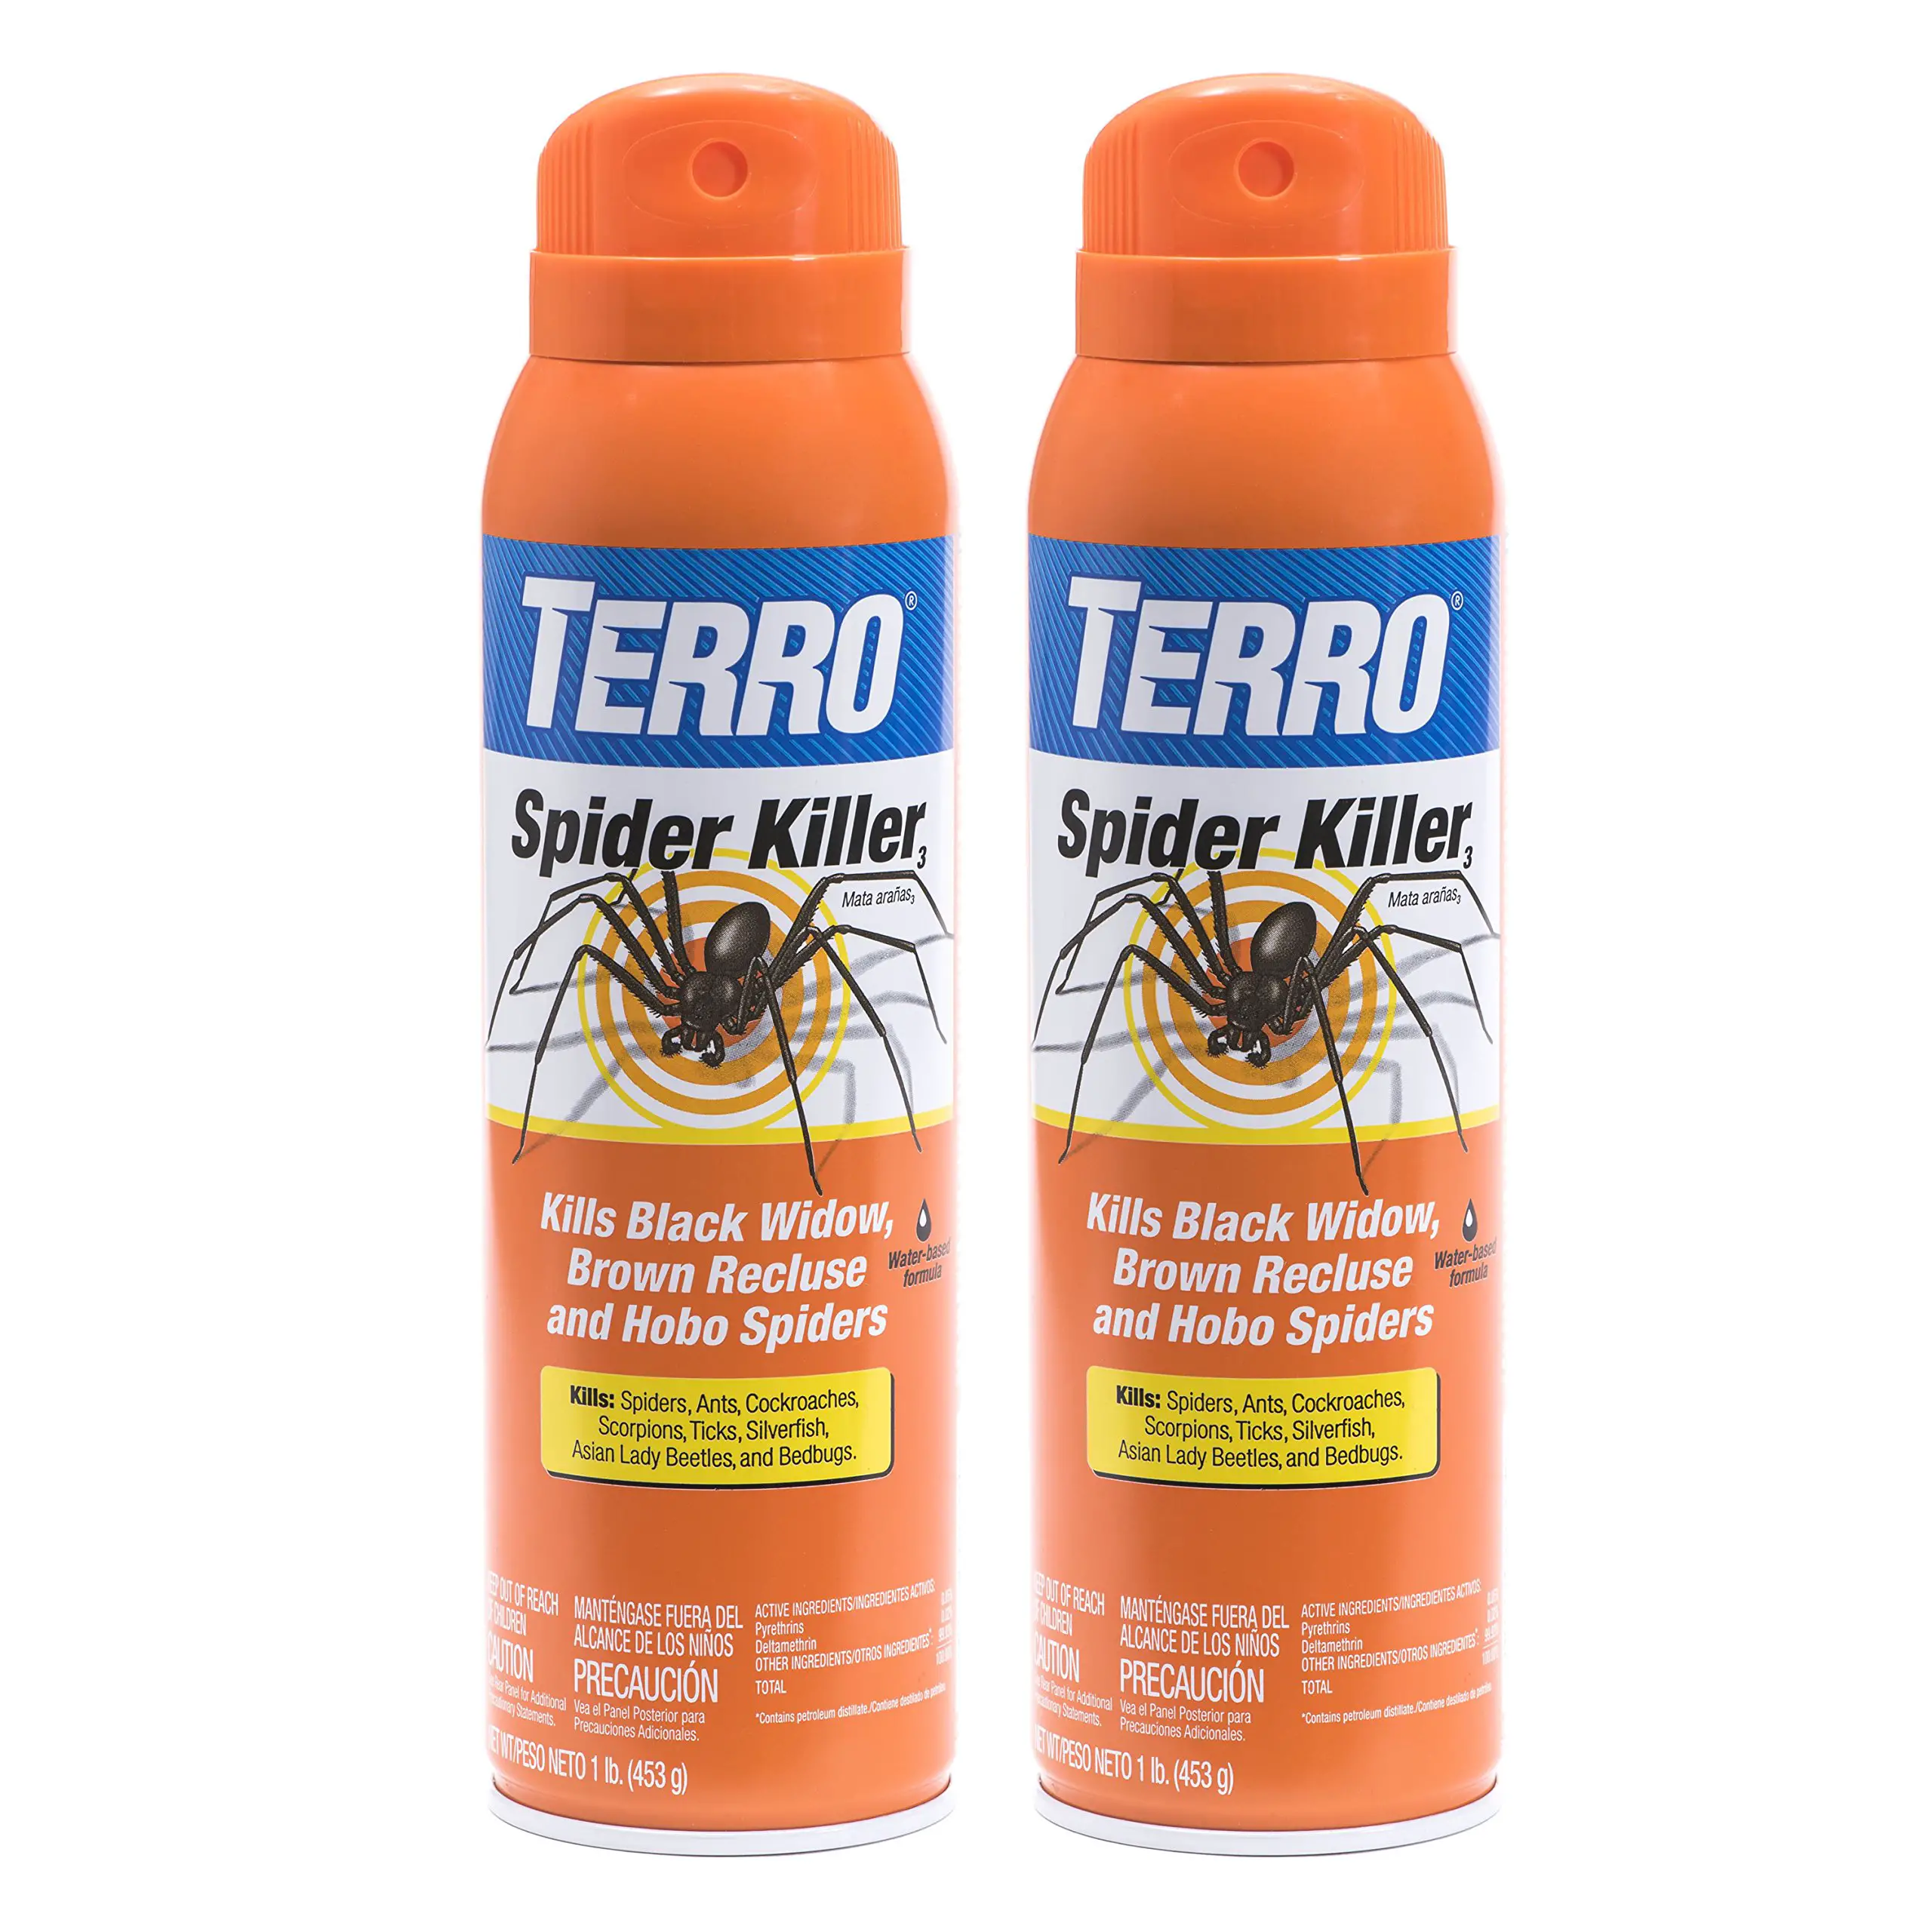 Non-Chemical Options For Killing Spider Eggs